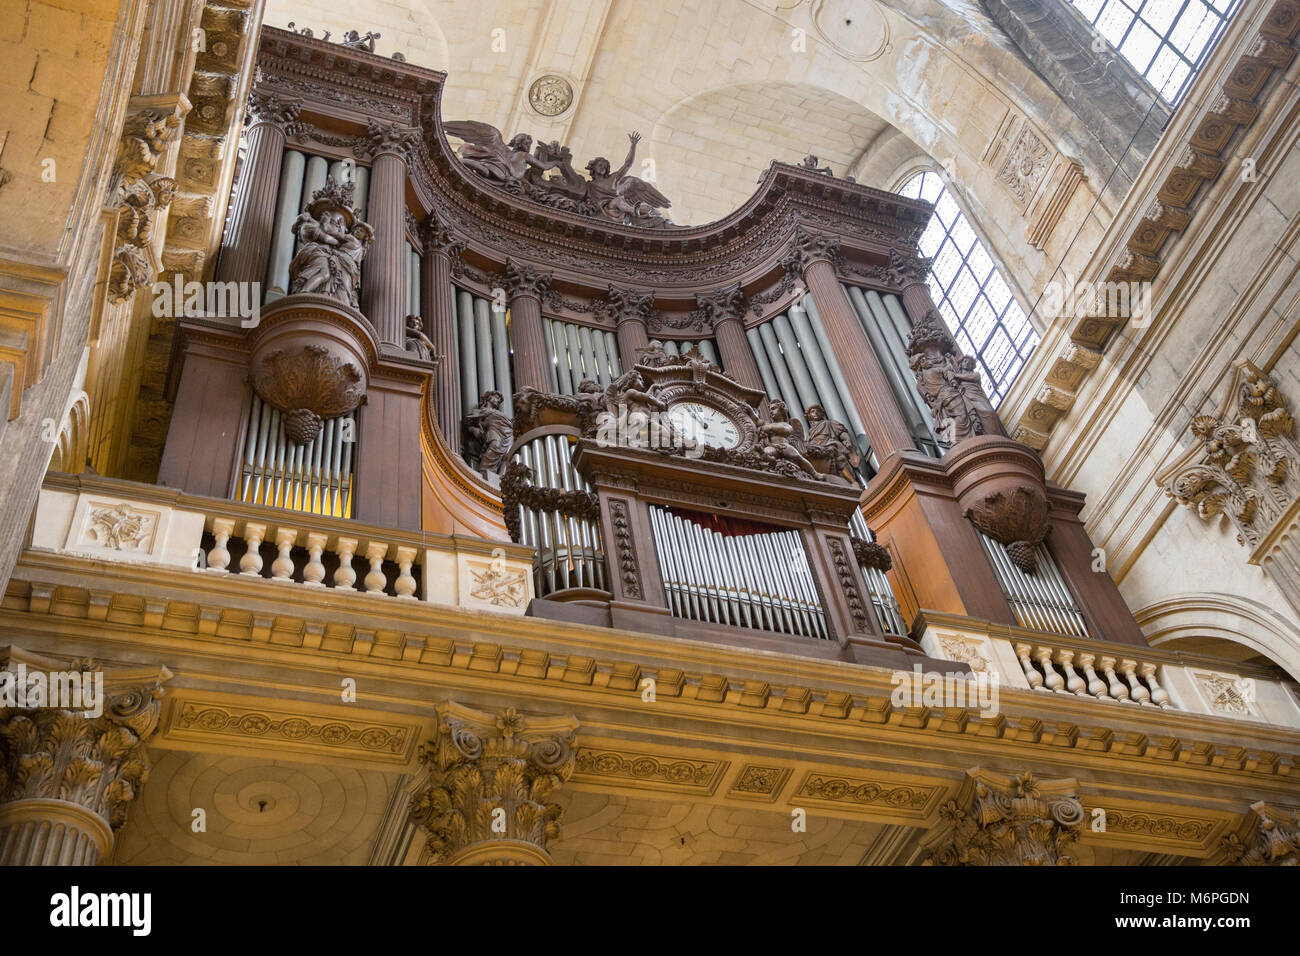 In 1862 Aristide Cavaille-Coll reconstructed and improved The Great Organ built by Francois-Henri Clicquot in the Church of Saint-Sulpice, Paris, Fran Stock Photo